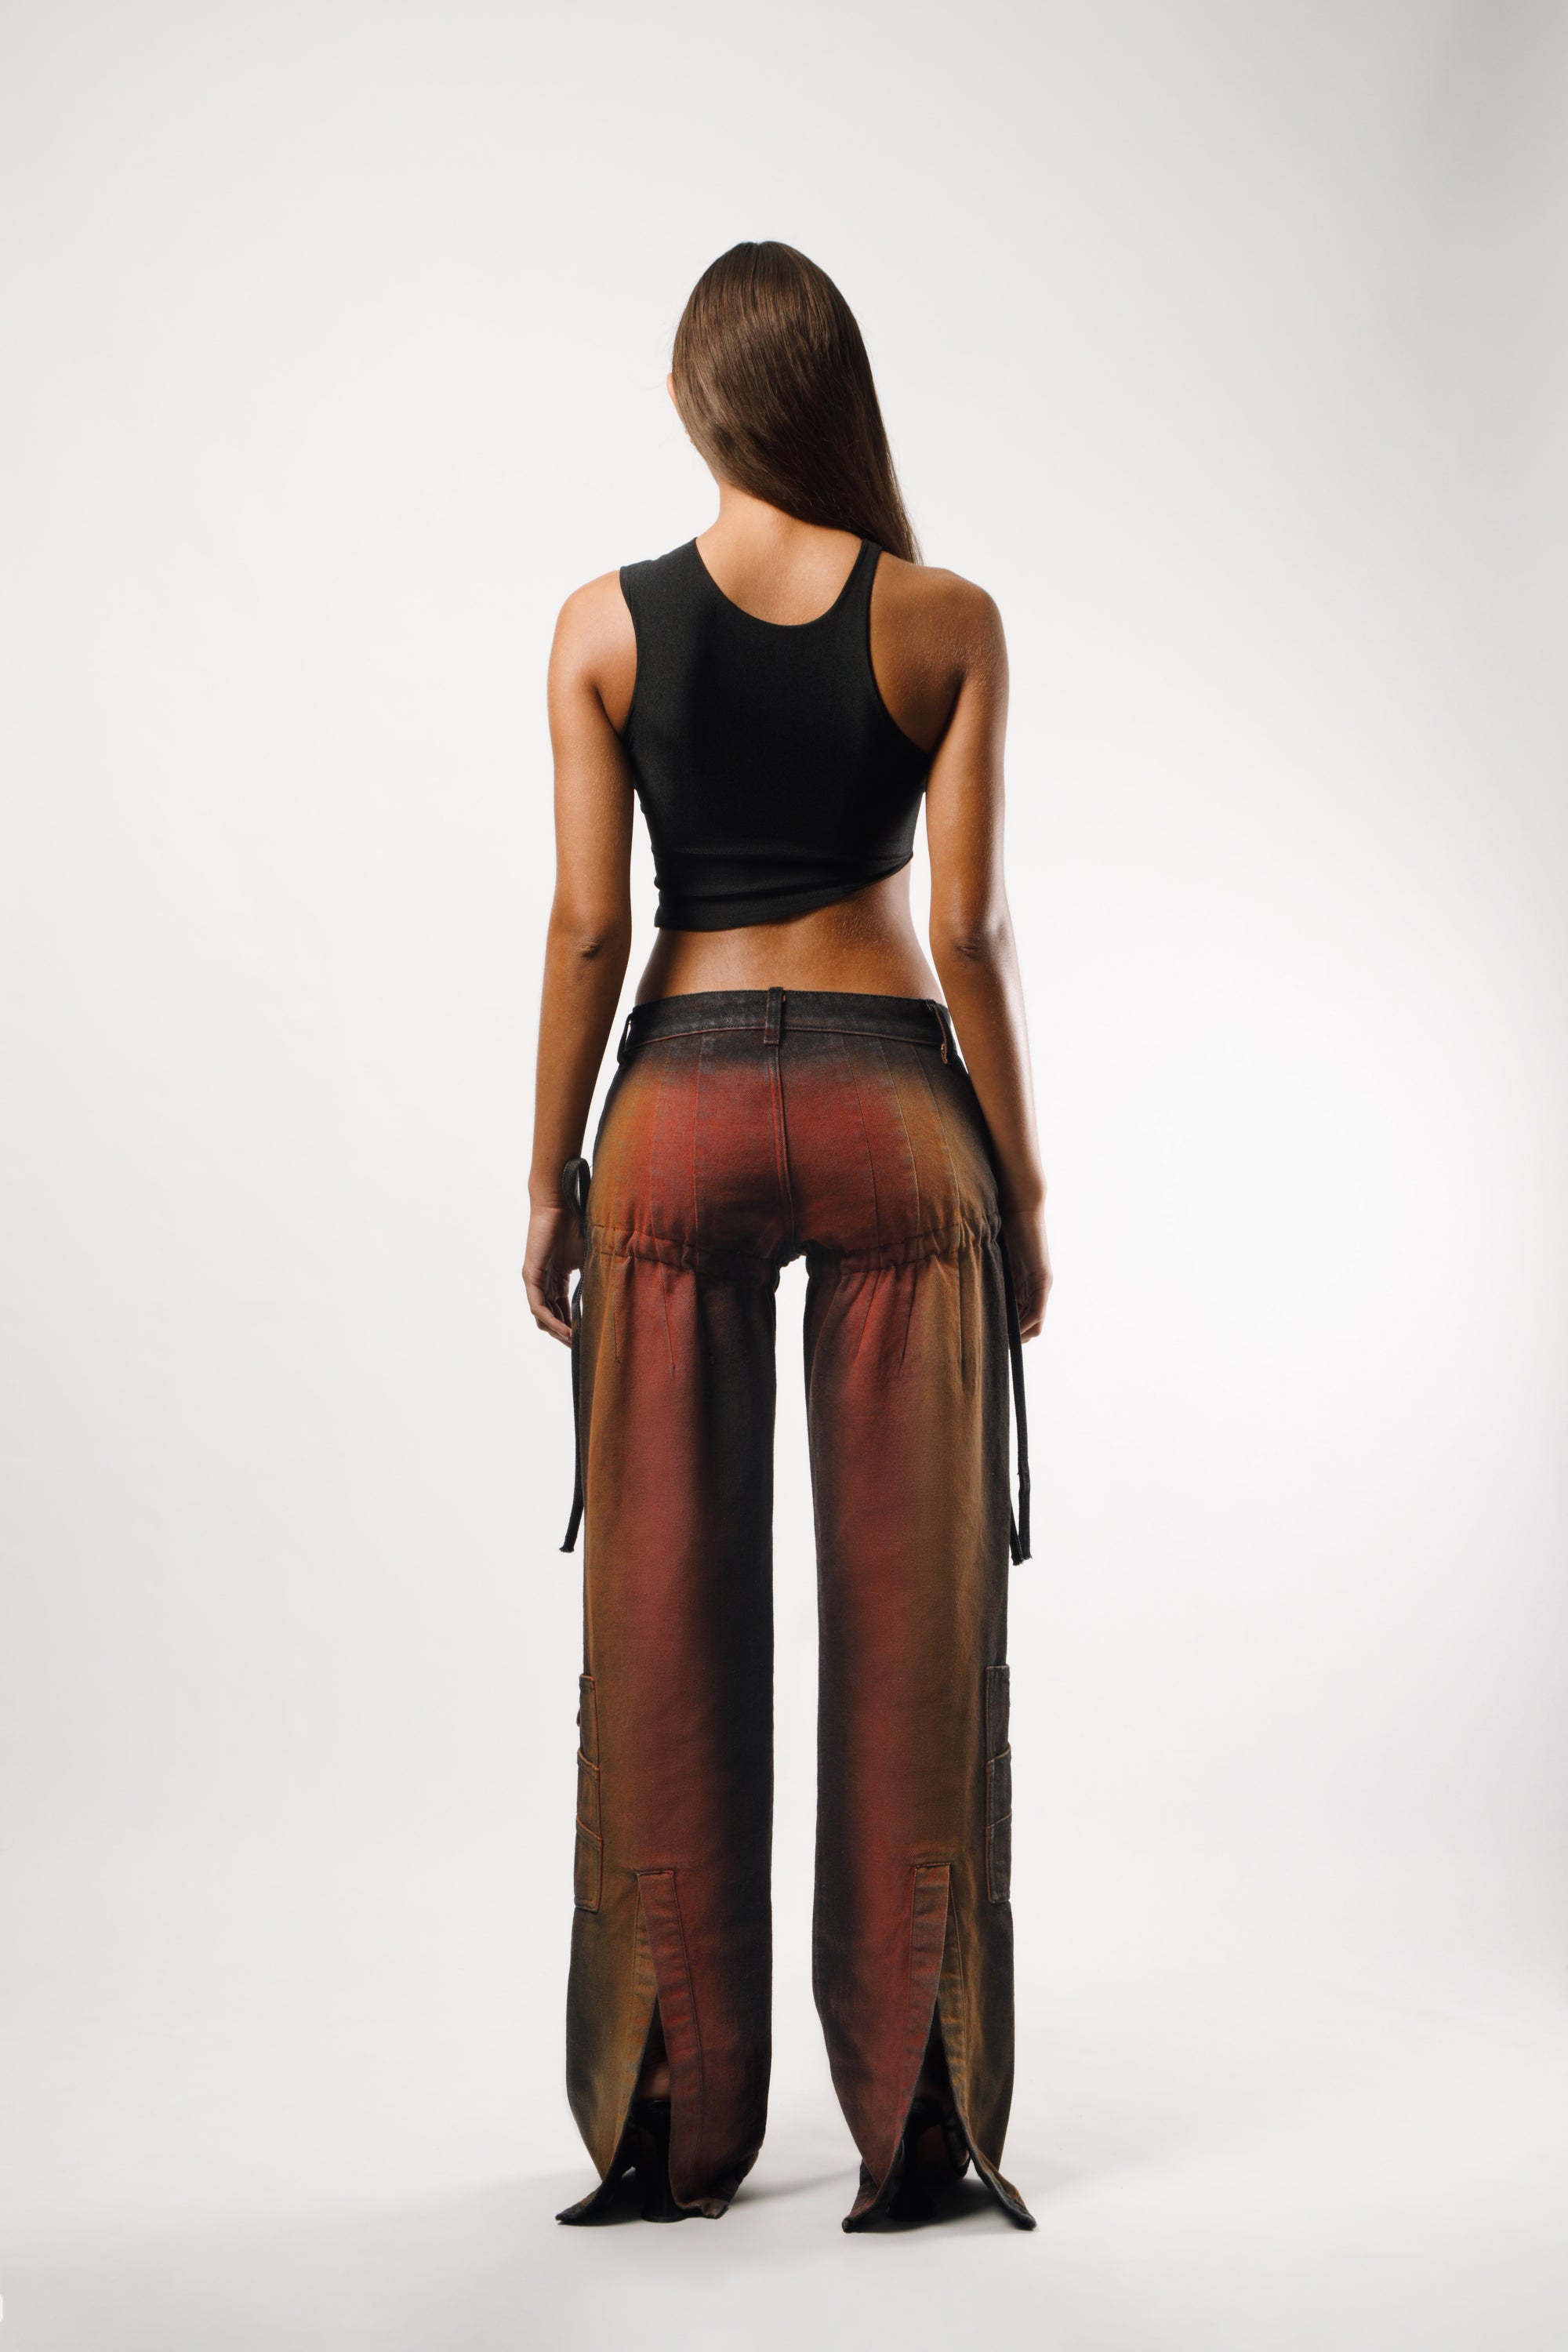 Long pants in sunbeams with darts and opening slits on the back, with adjustable cords to embellish the silhouette. Treated with ecological ozone washing and hand sprayed - back